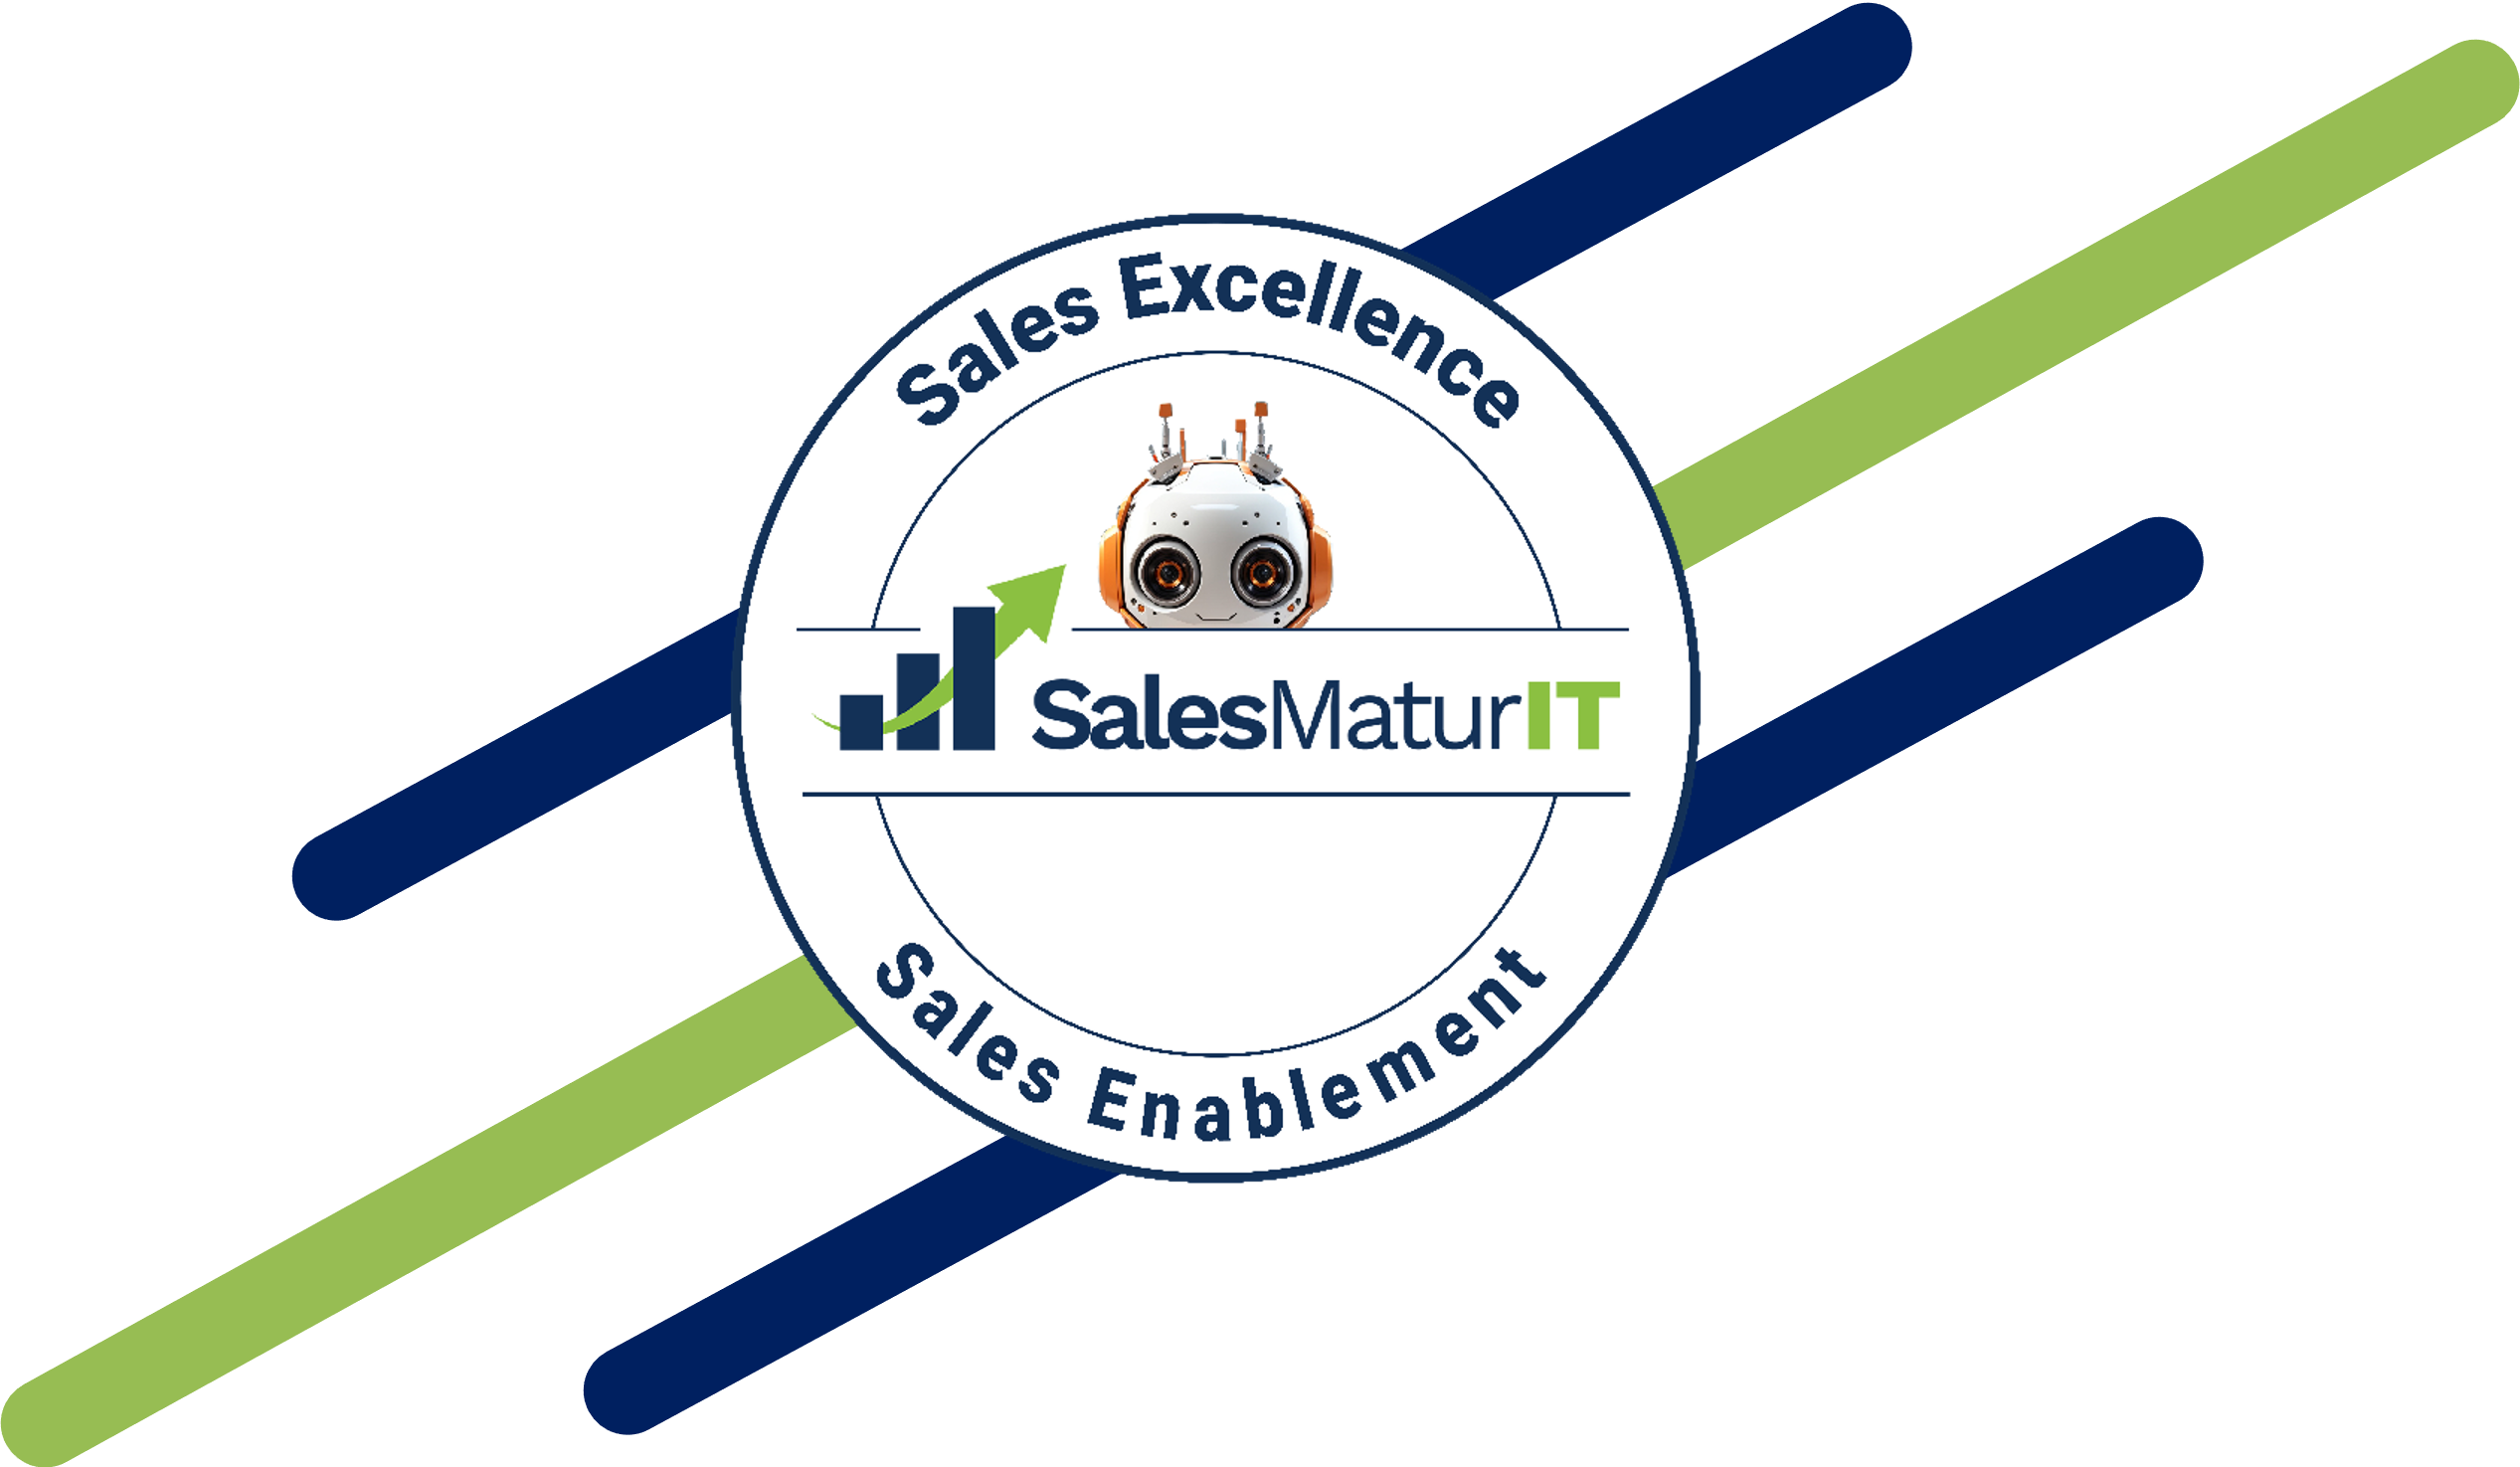 Logo of Sales MaturIT, showcasing 'SELMA SALES MATURIT' in a bold font, reflecting the expertise of an MSP Sales Coach in a modern, minimalist style.